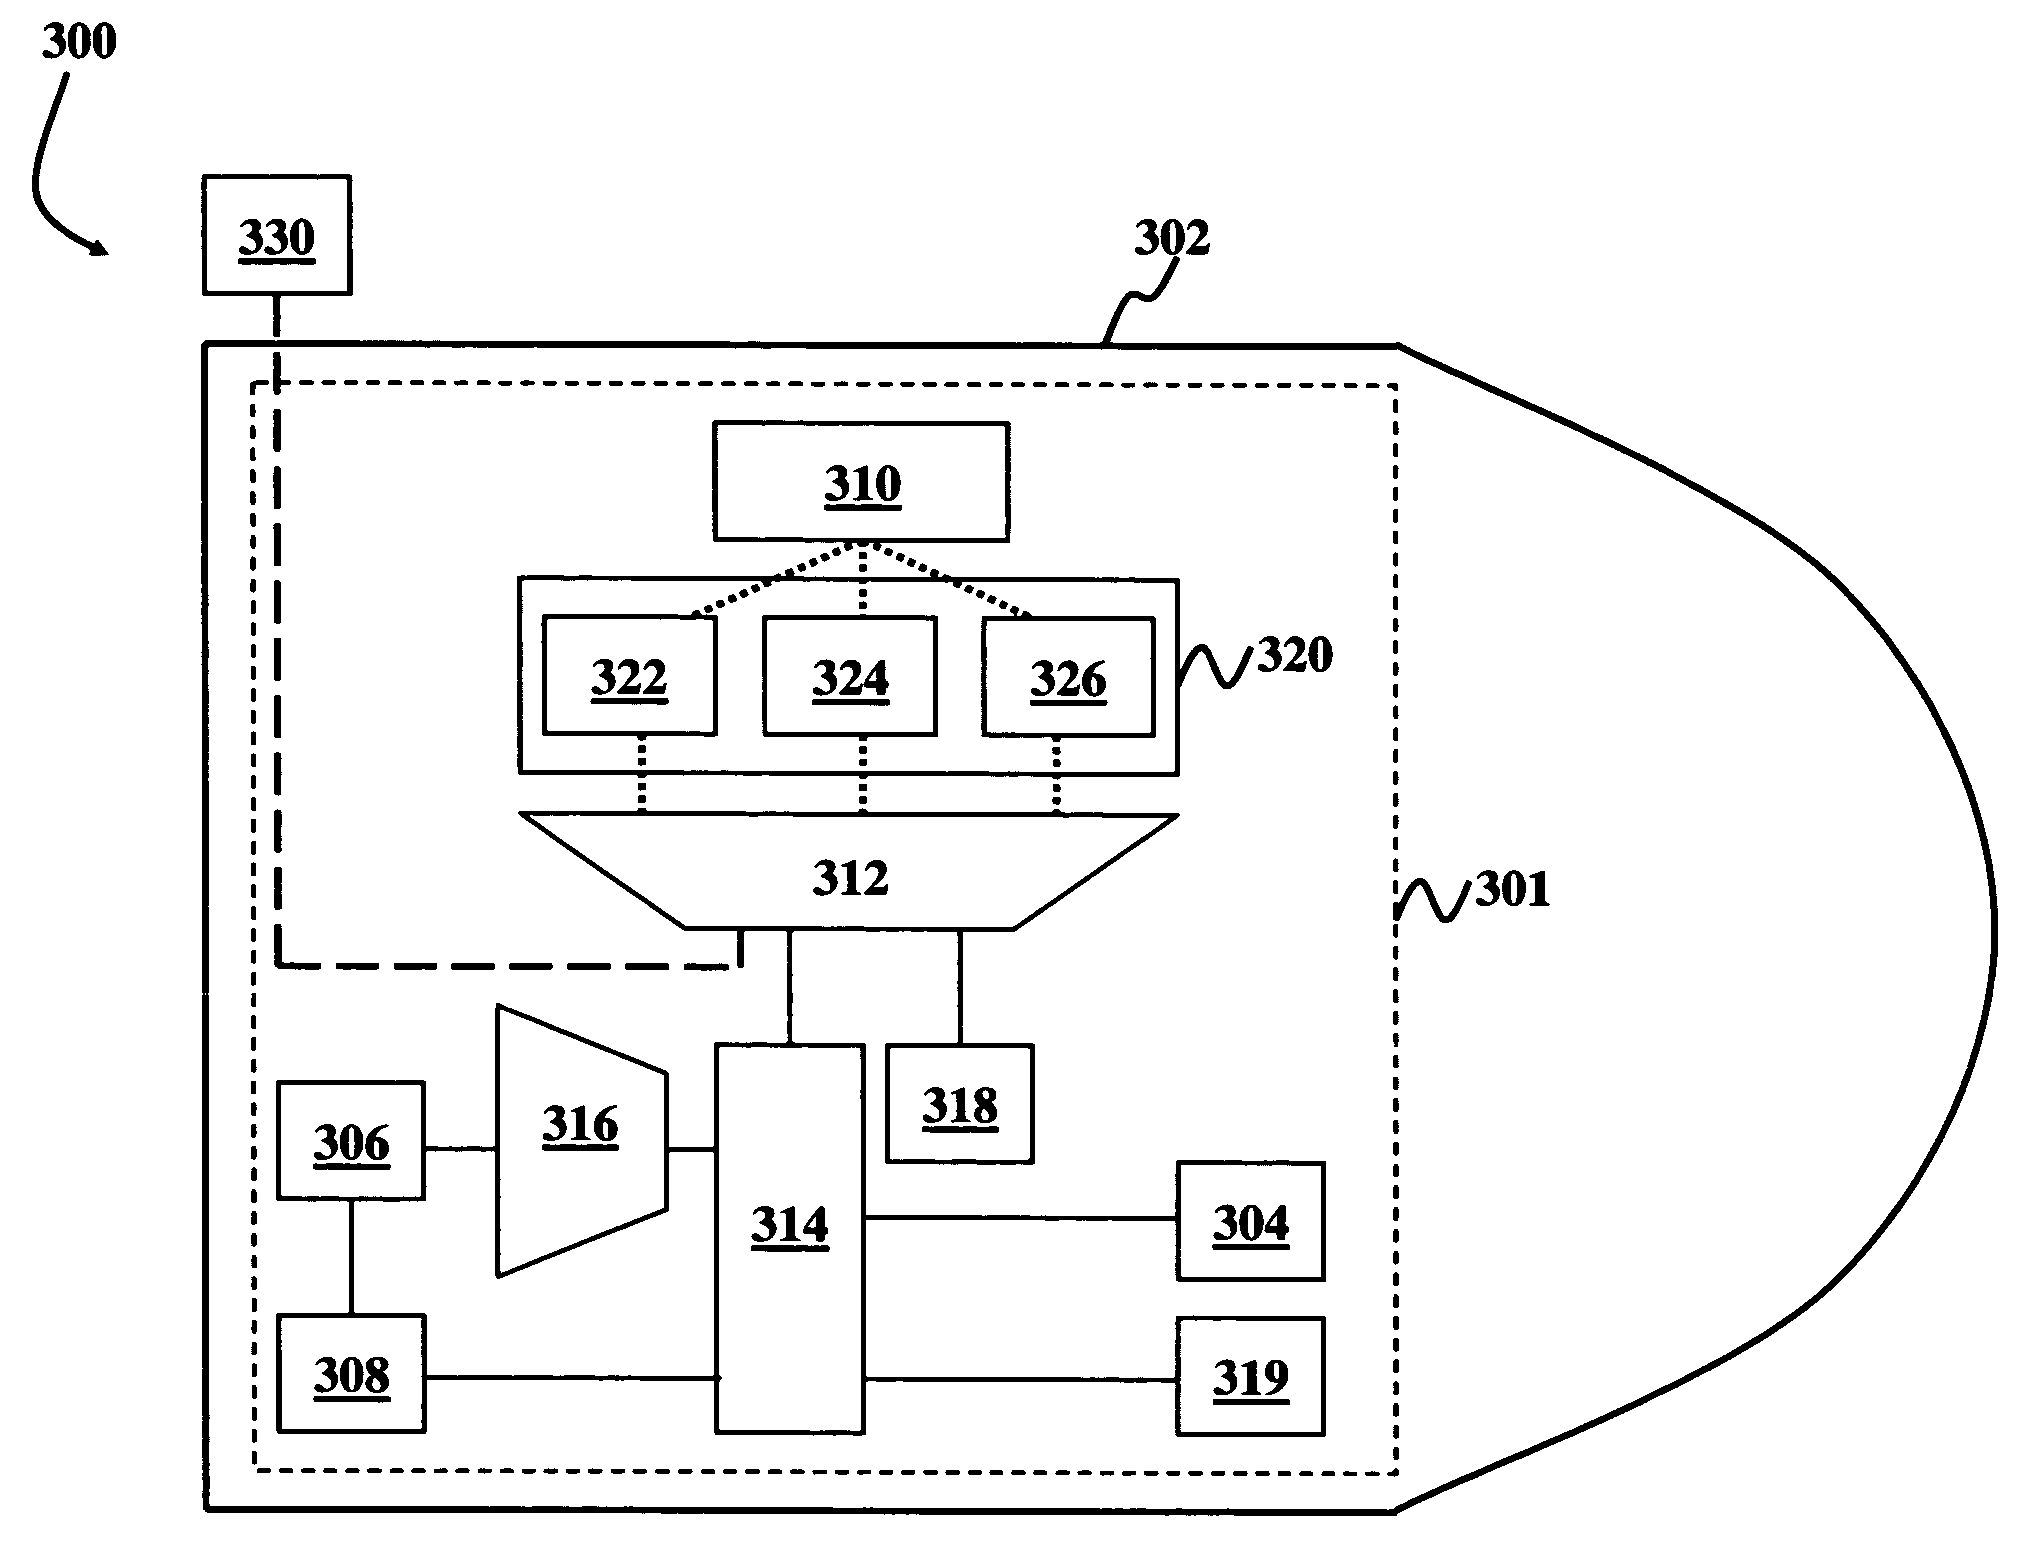 System and method for in-flight trajectory path synthesis using the time sampled output of onboard sensors